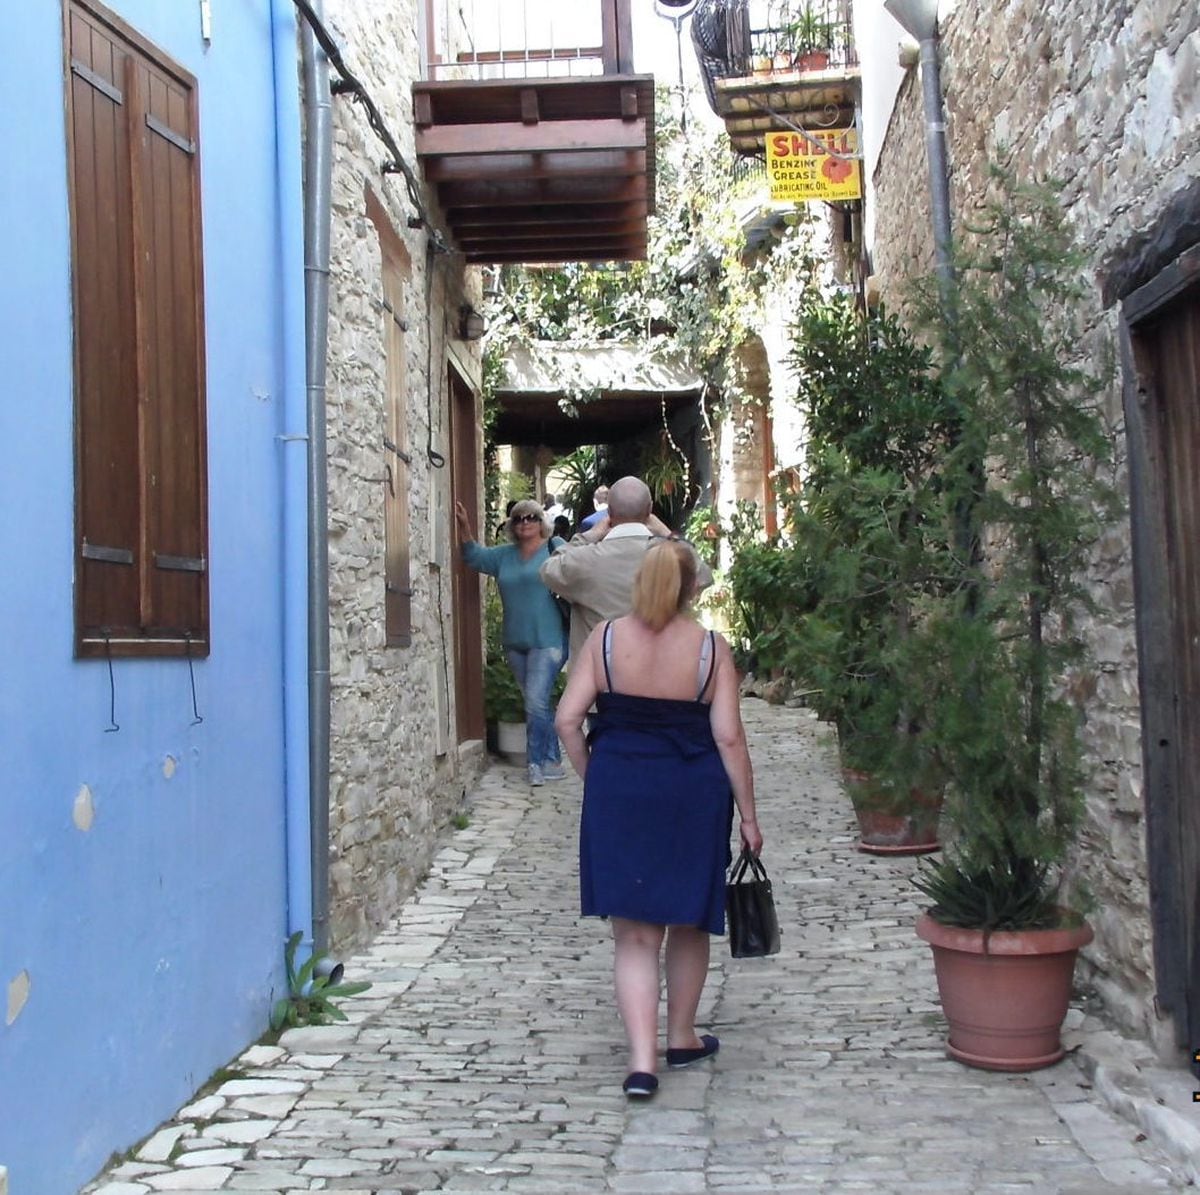 The narrow streets of the lacemaking village of Lefkara